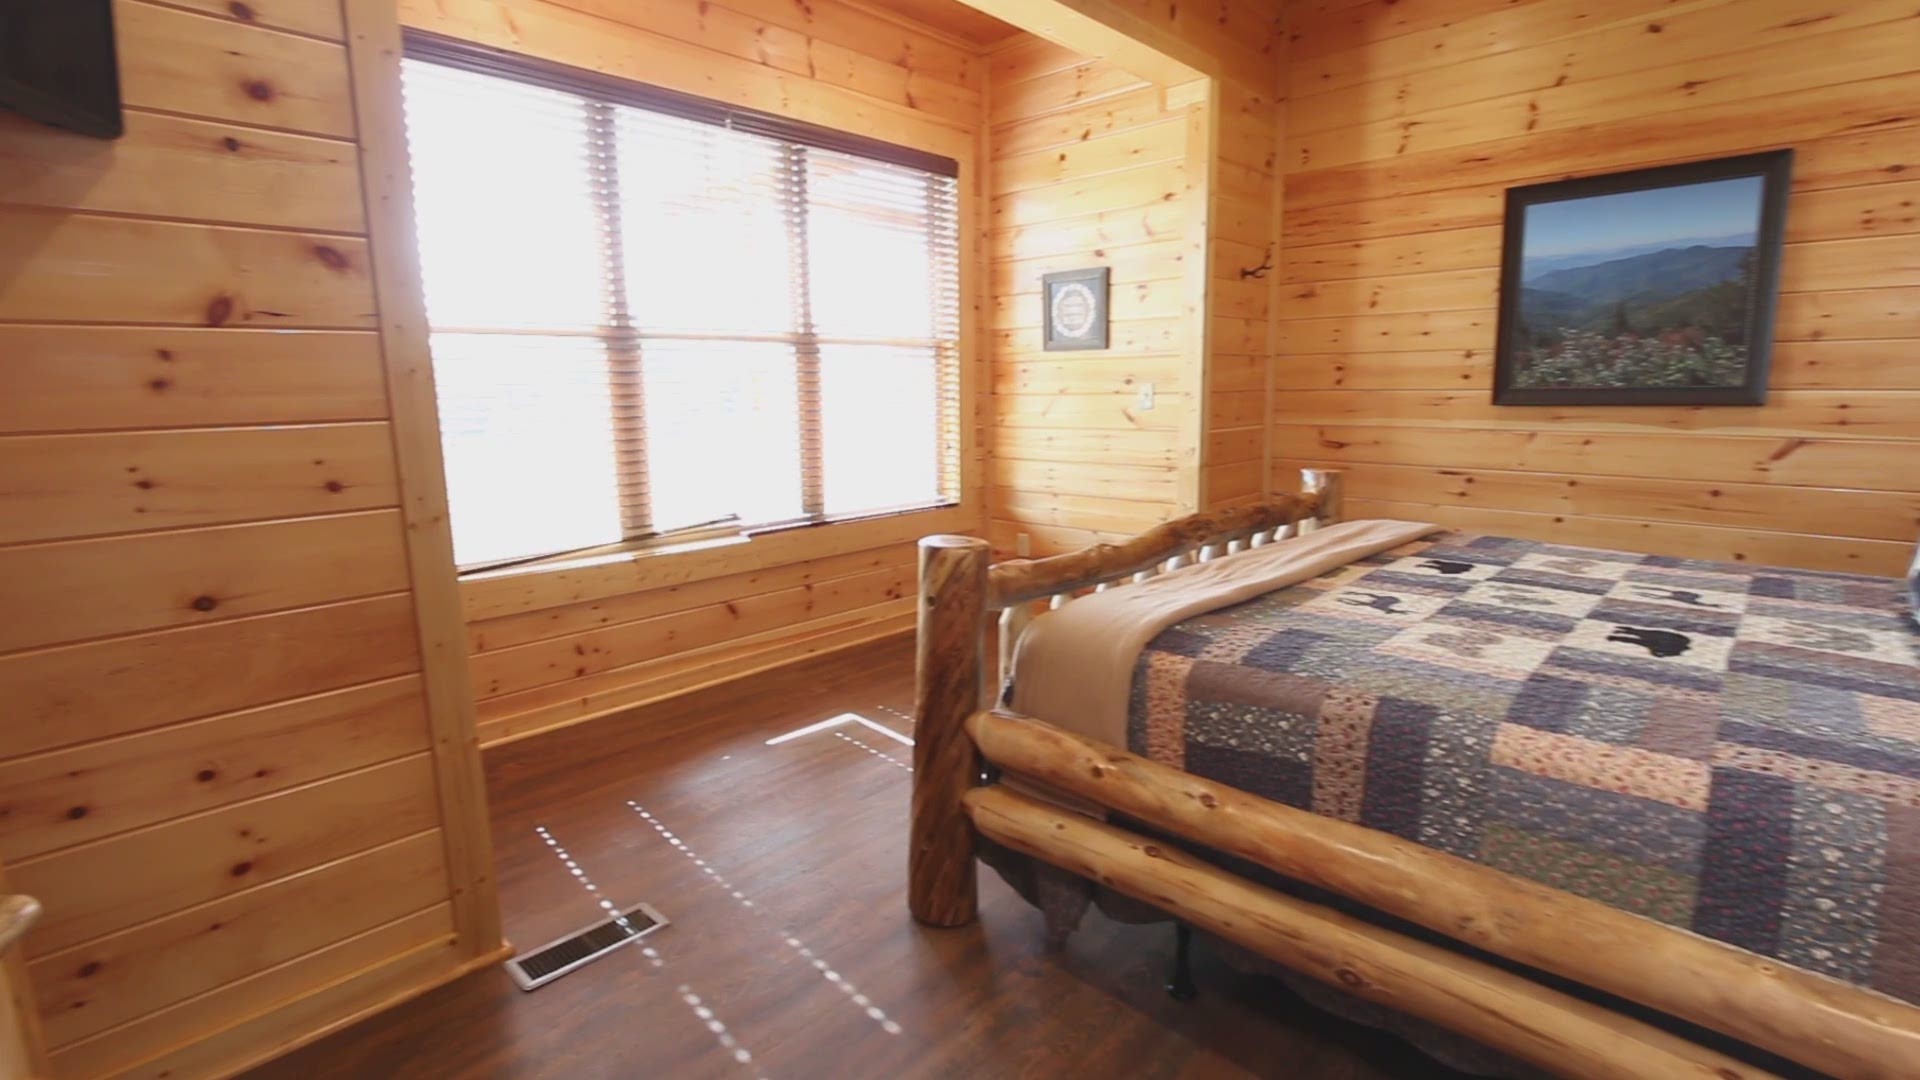 The $1.5 million cabin that has everything